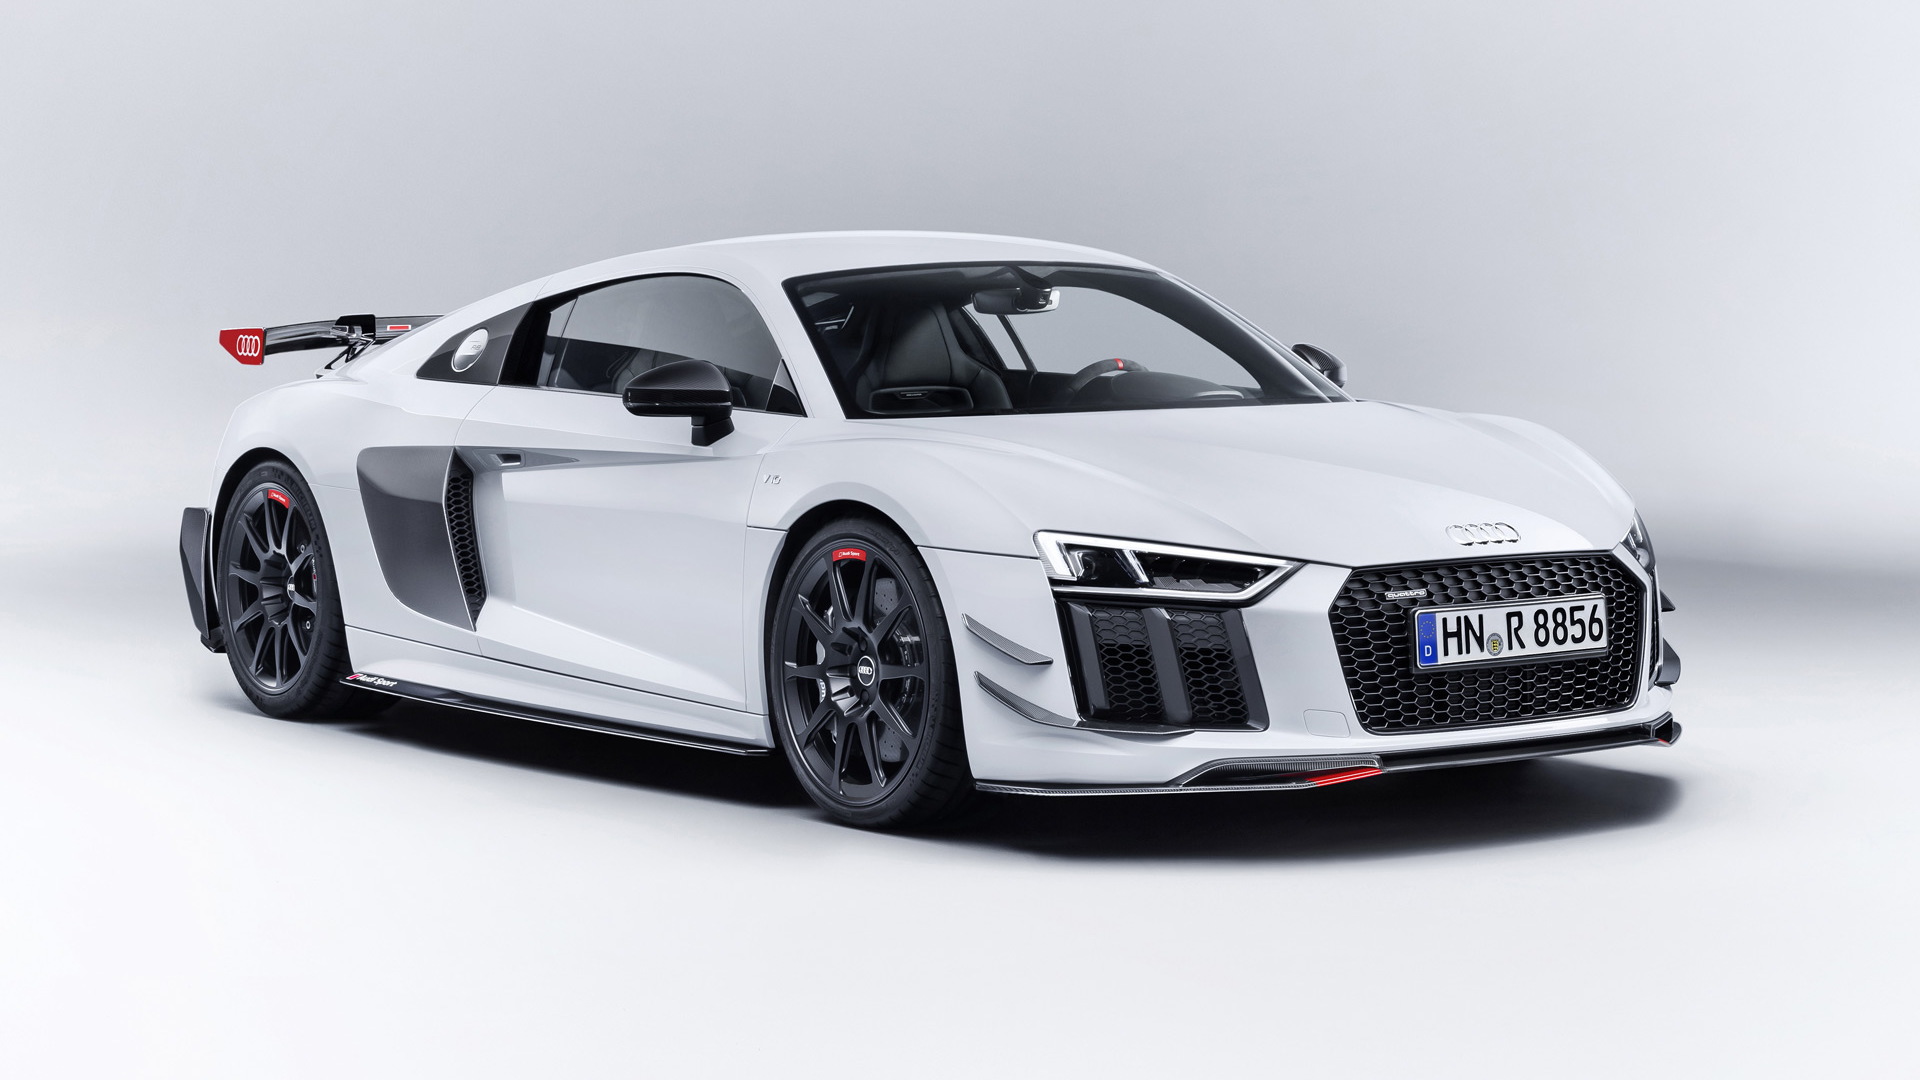 2018 Audi R8 fitted with items from Audi Sport Performance Parts range